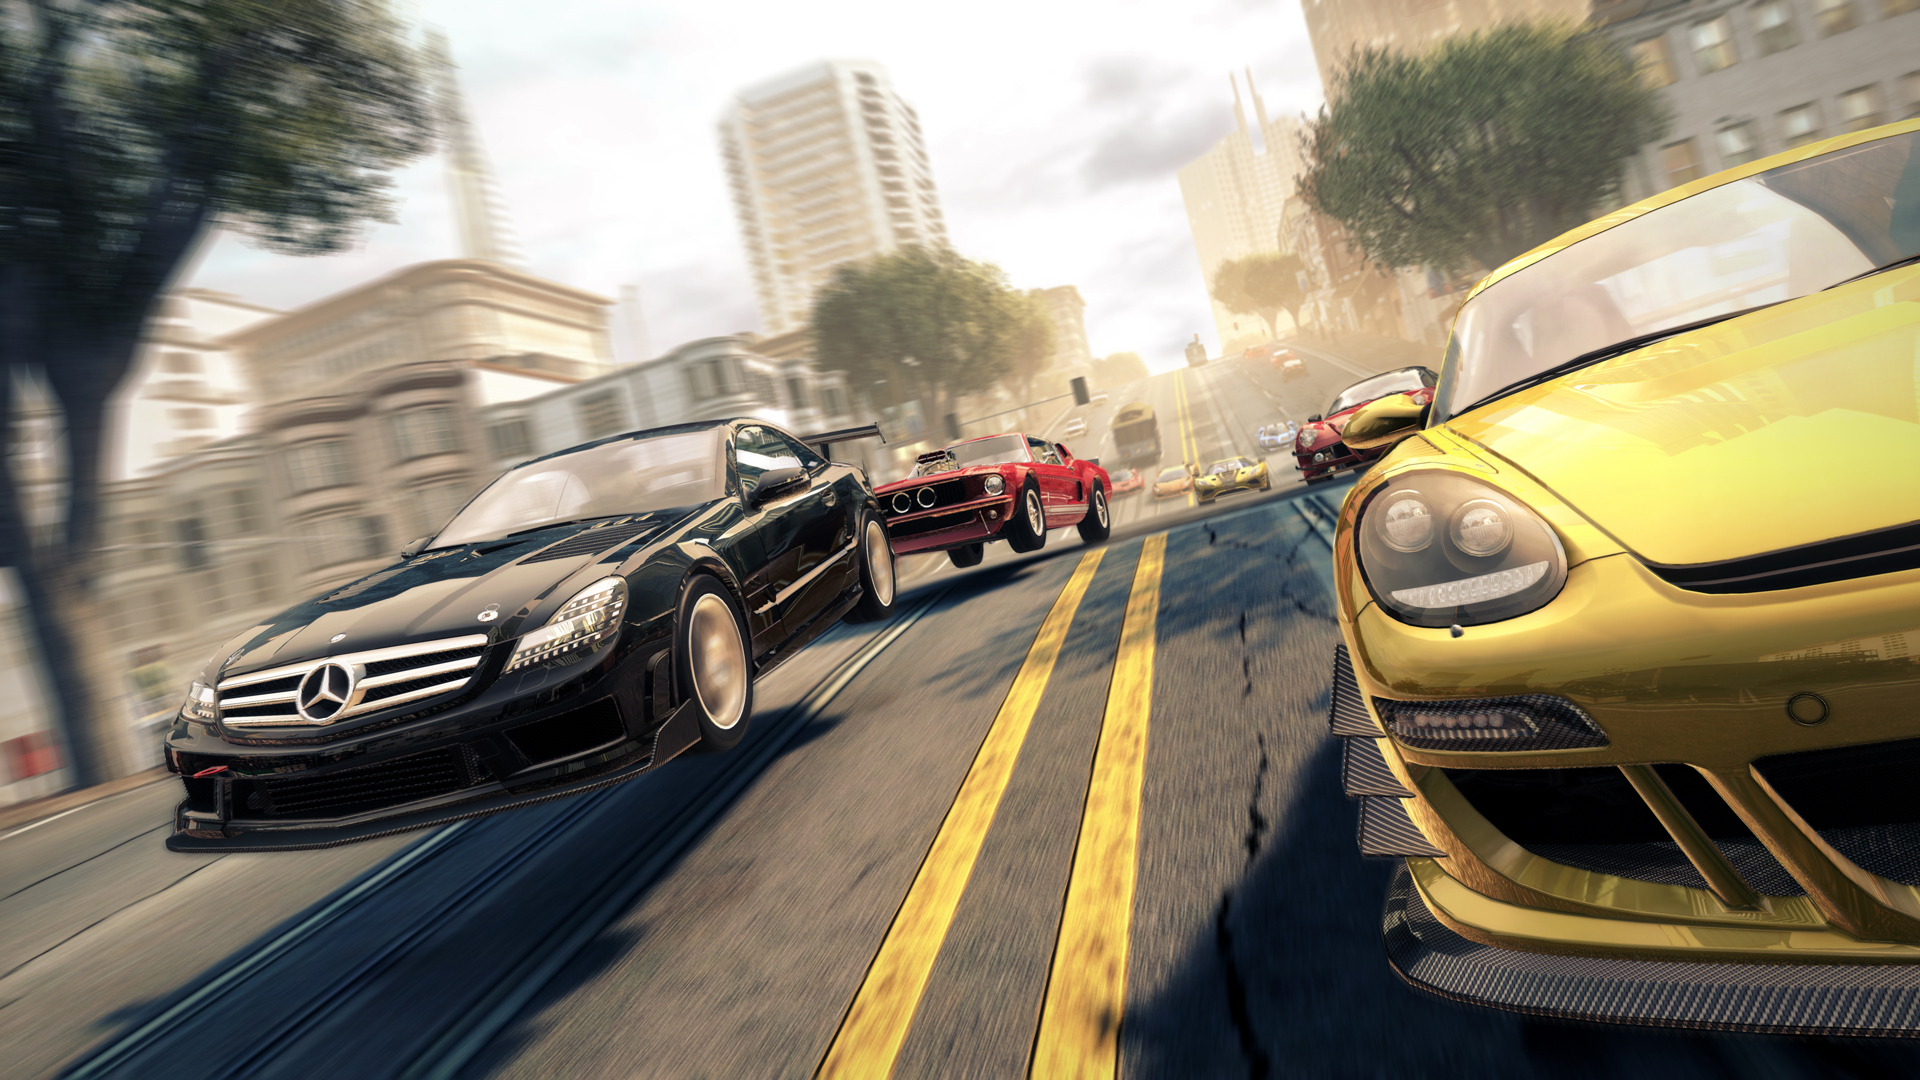 video game, the crew